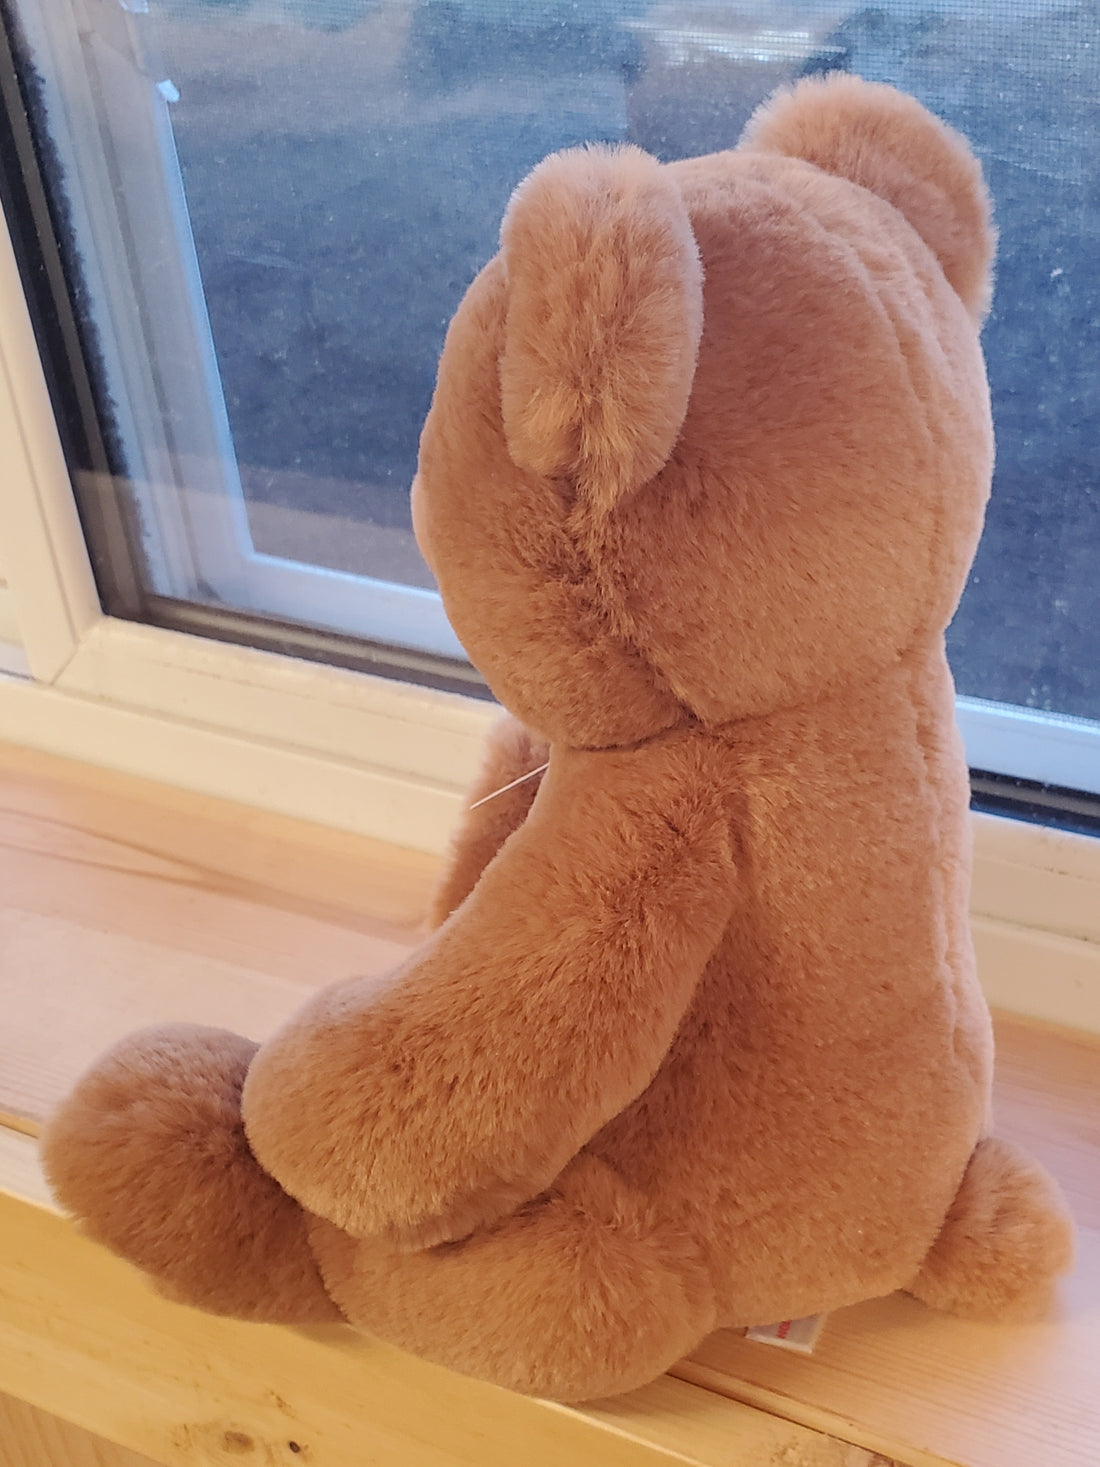 Brown Non-Jointed - 12" Baby Safe Bear by Teddy Hermann